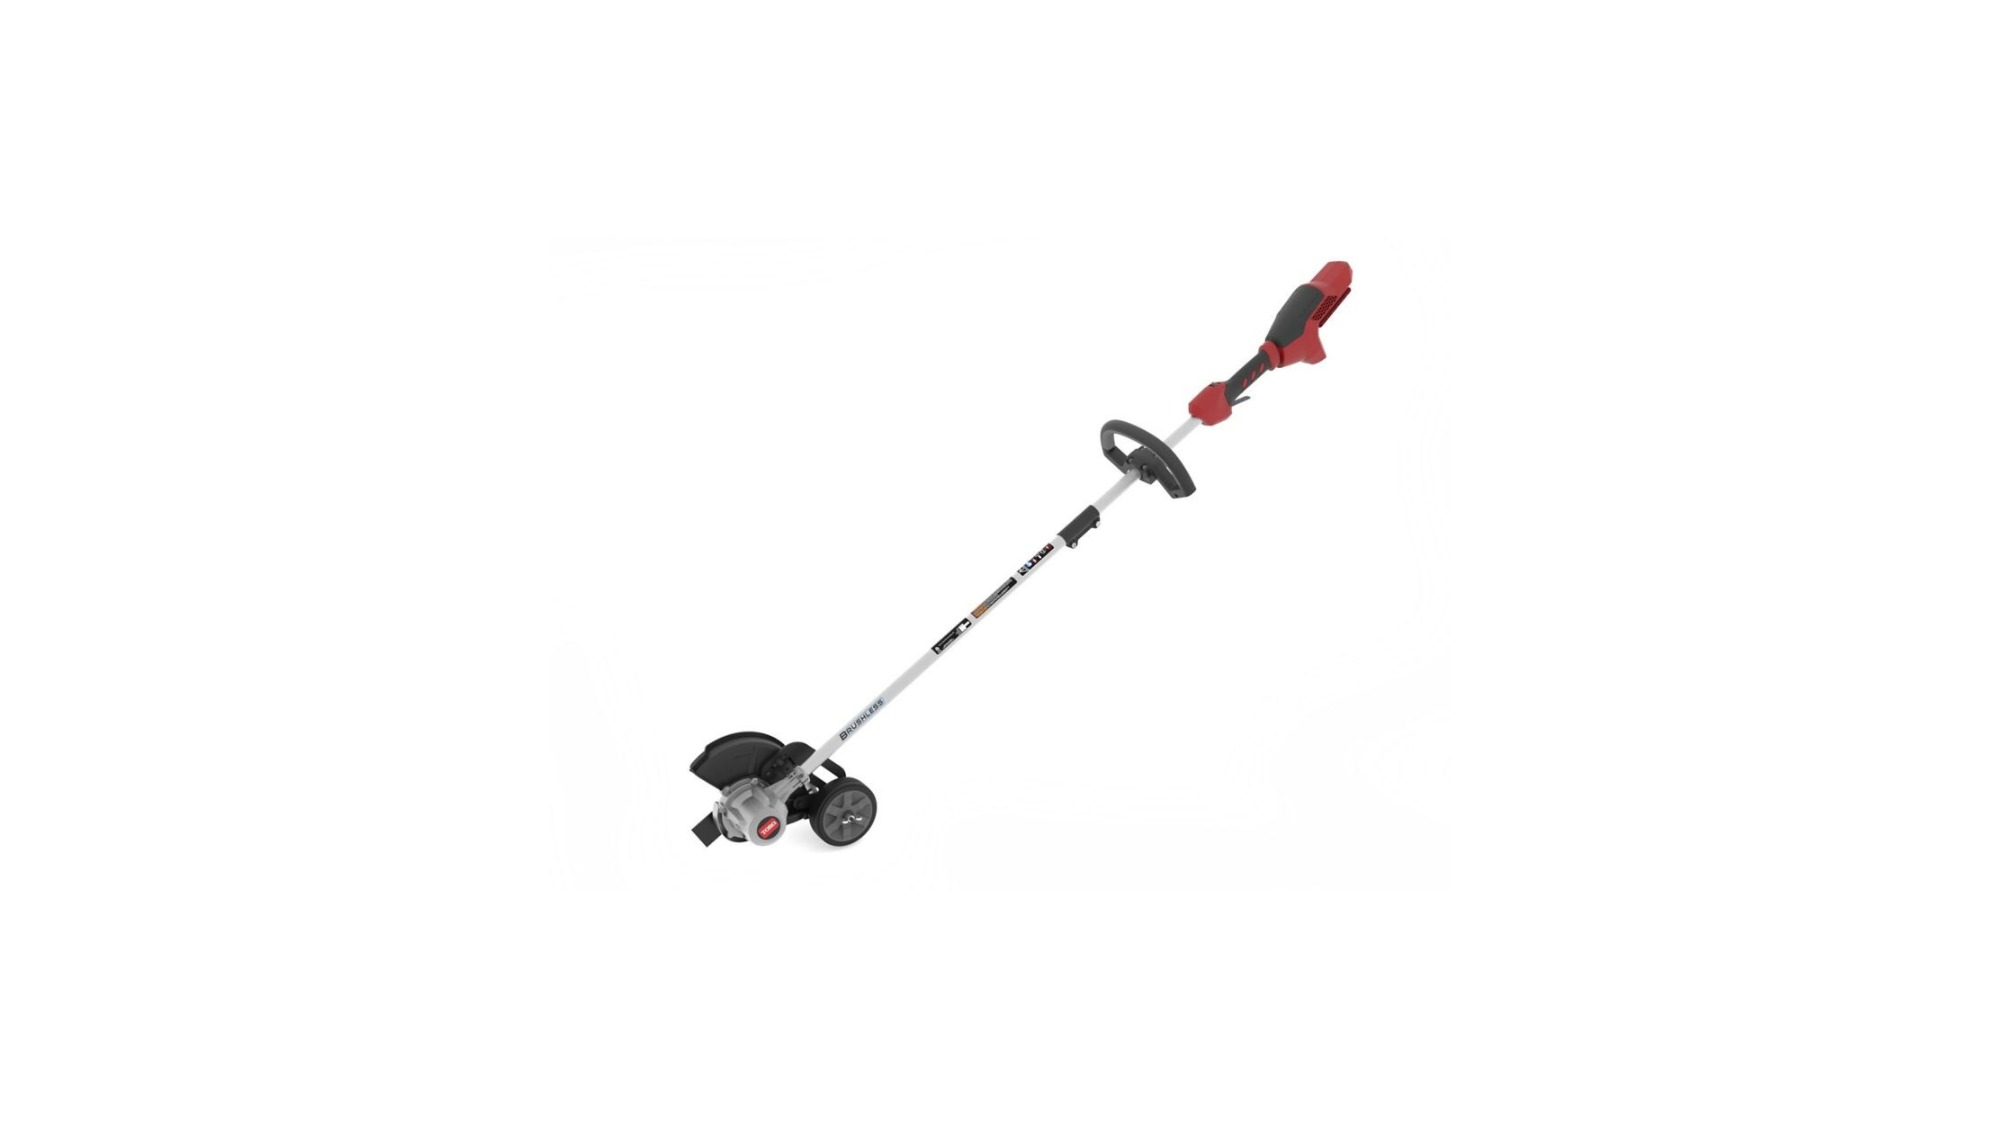 Toro 60v Max electric lawn edger on white background